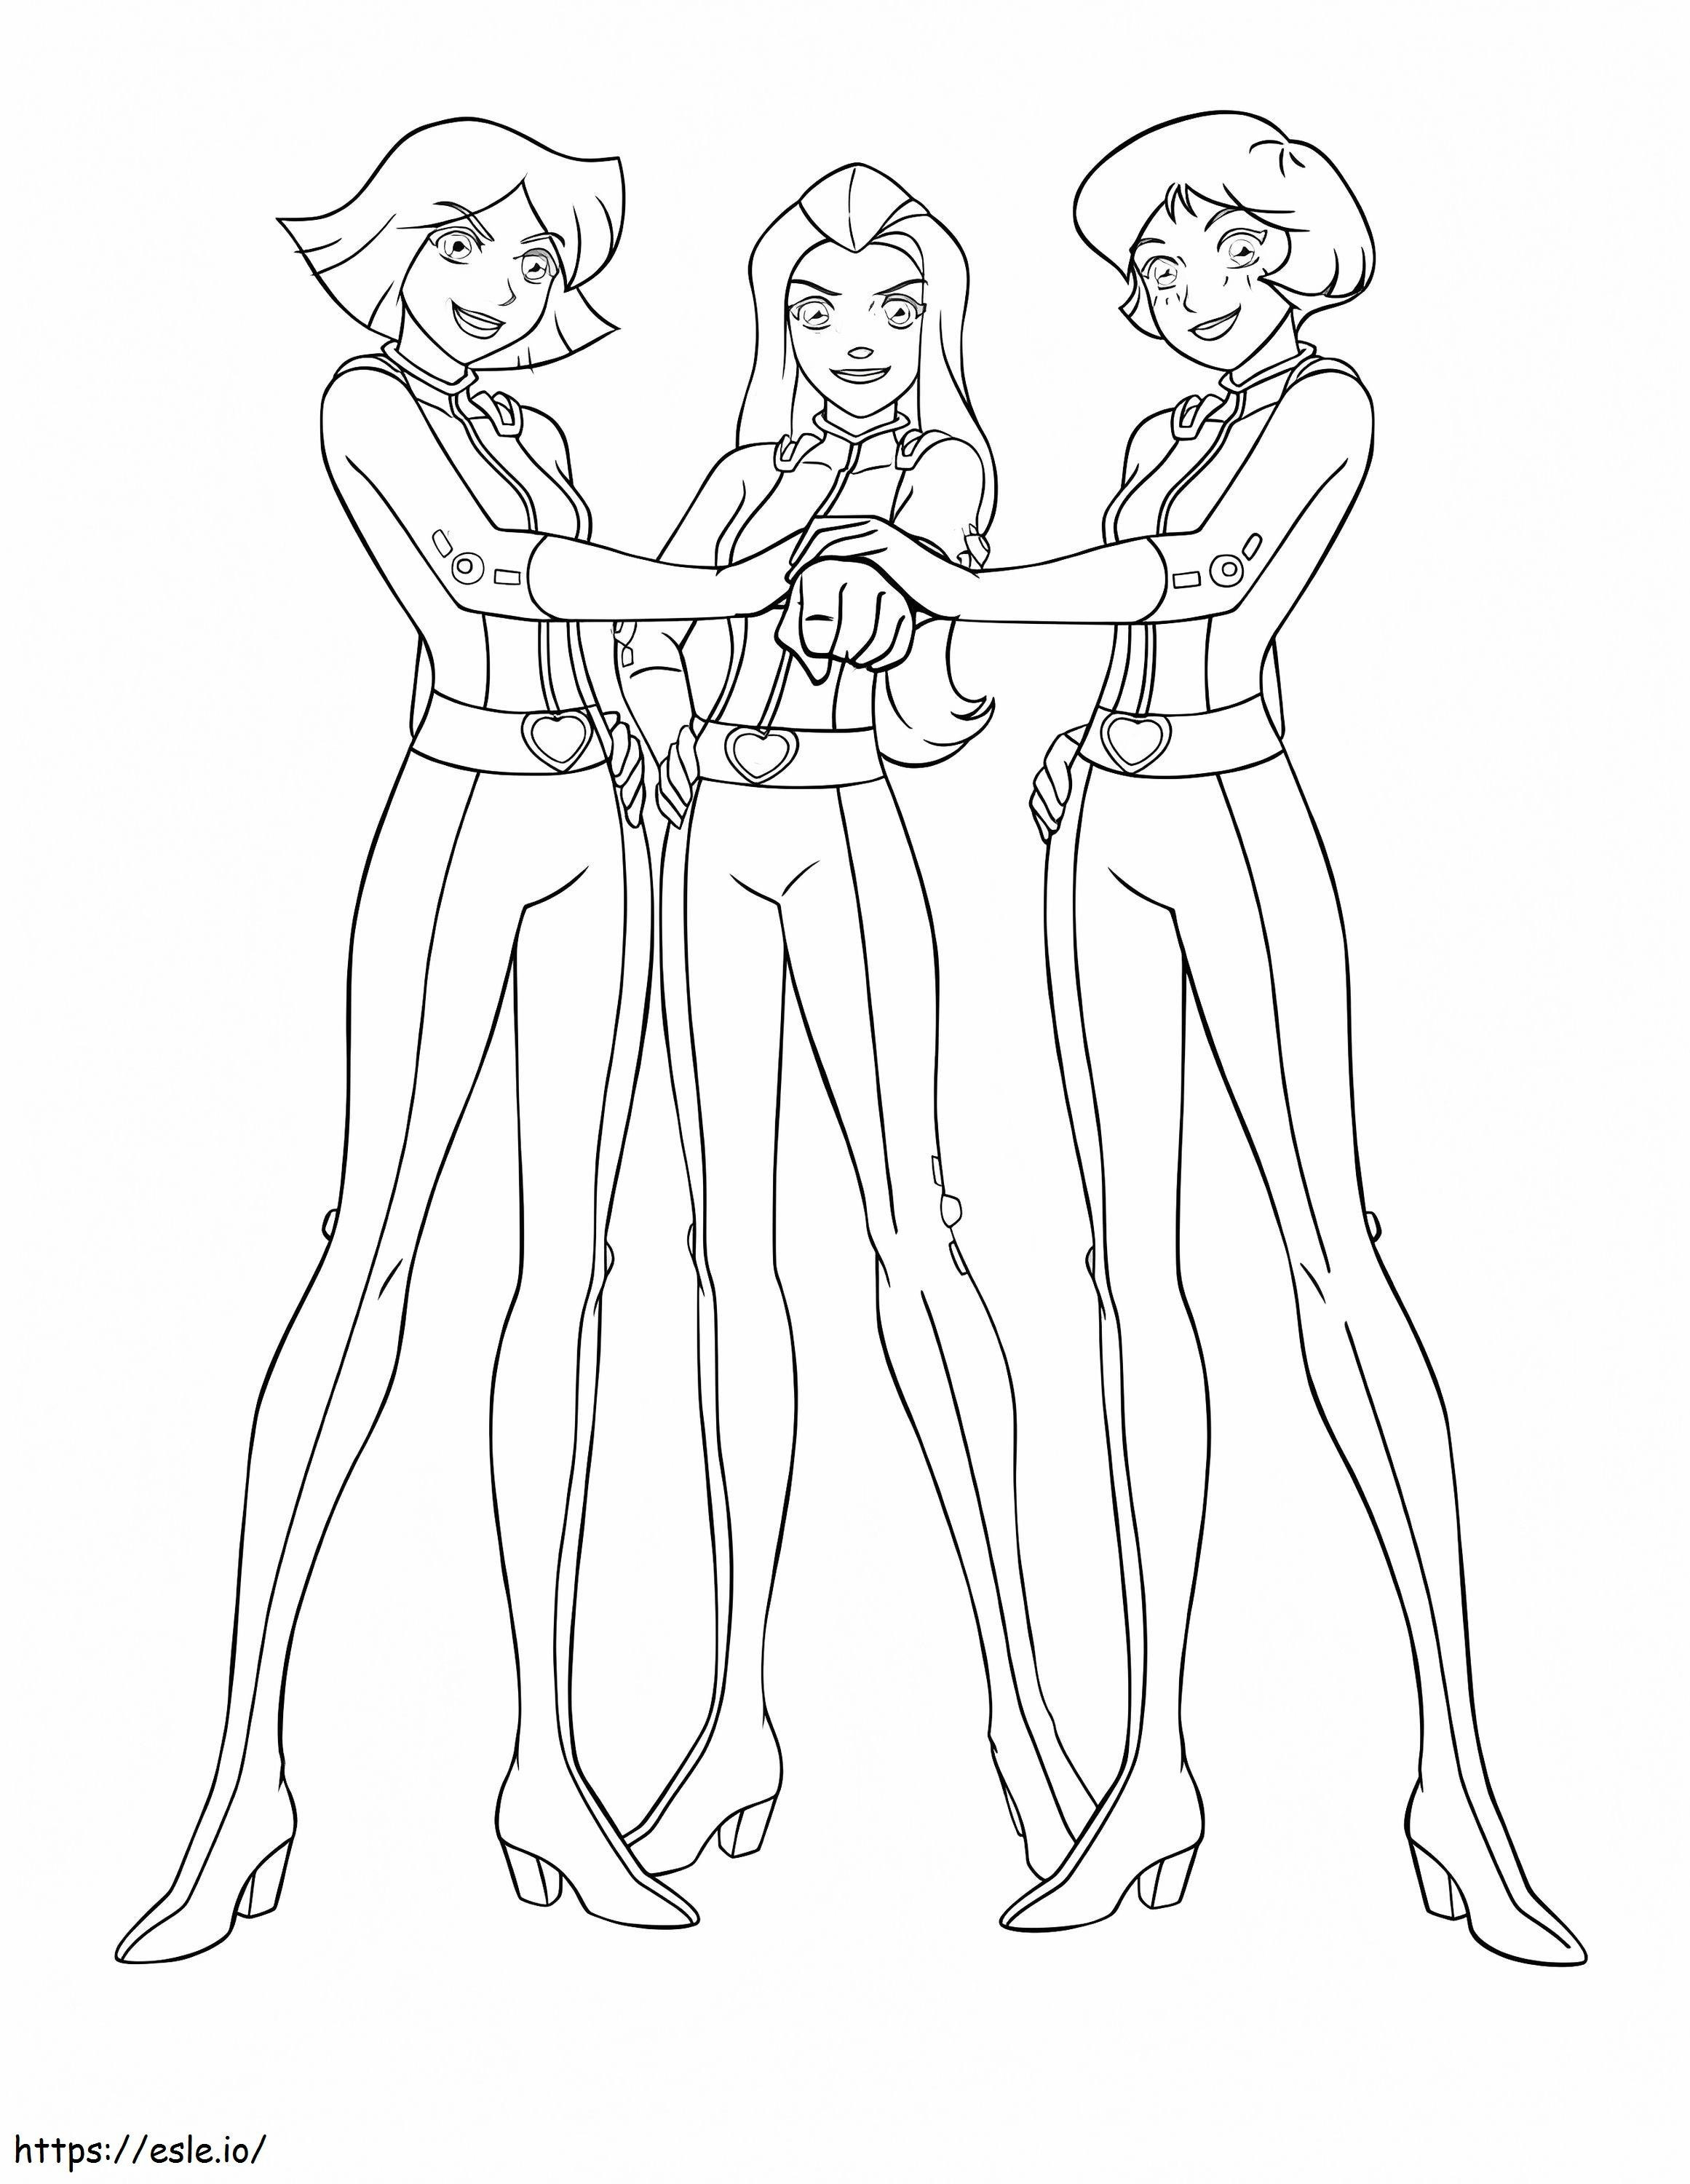 Totally Spies 3 coloring page